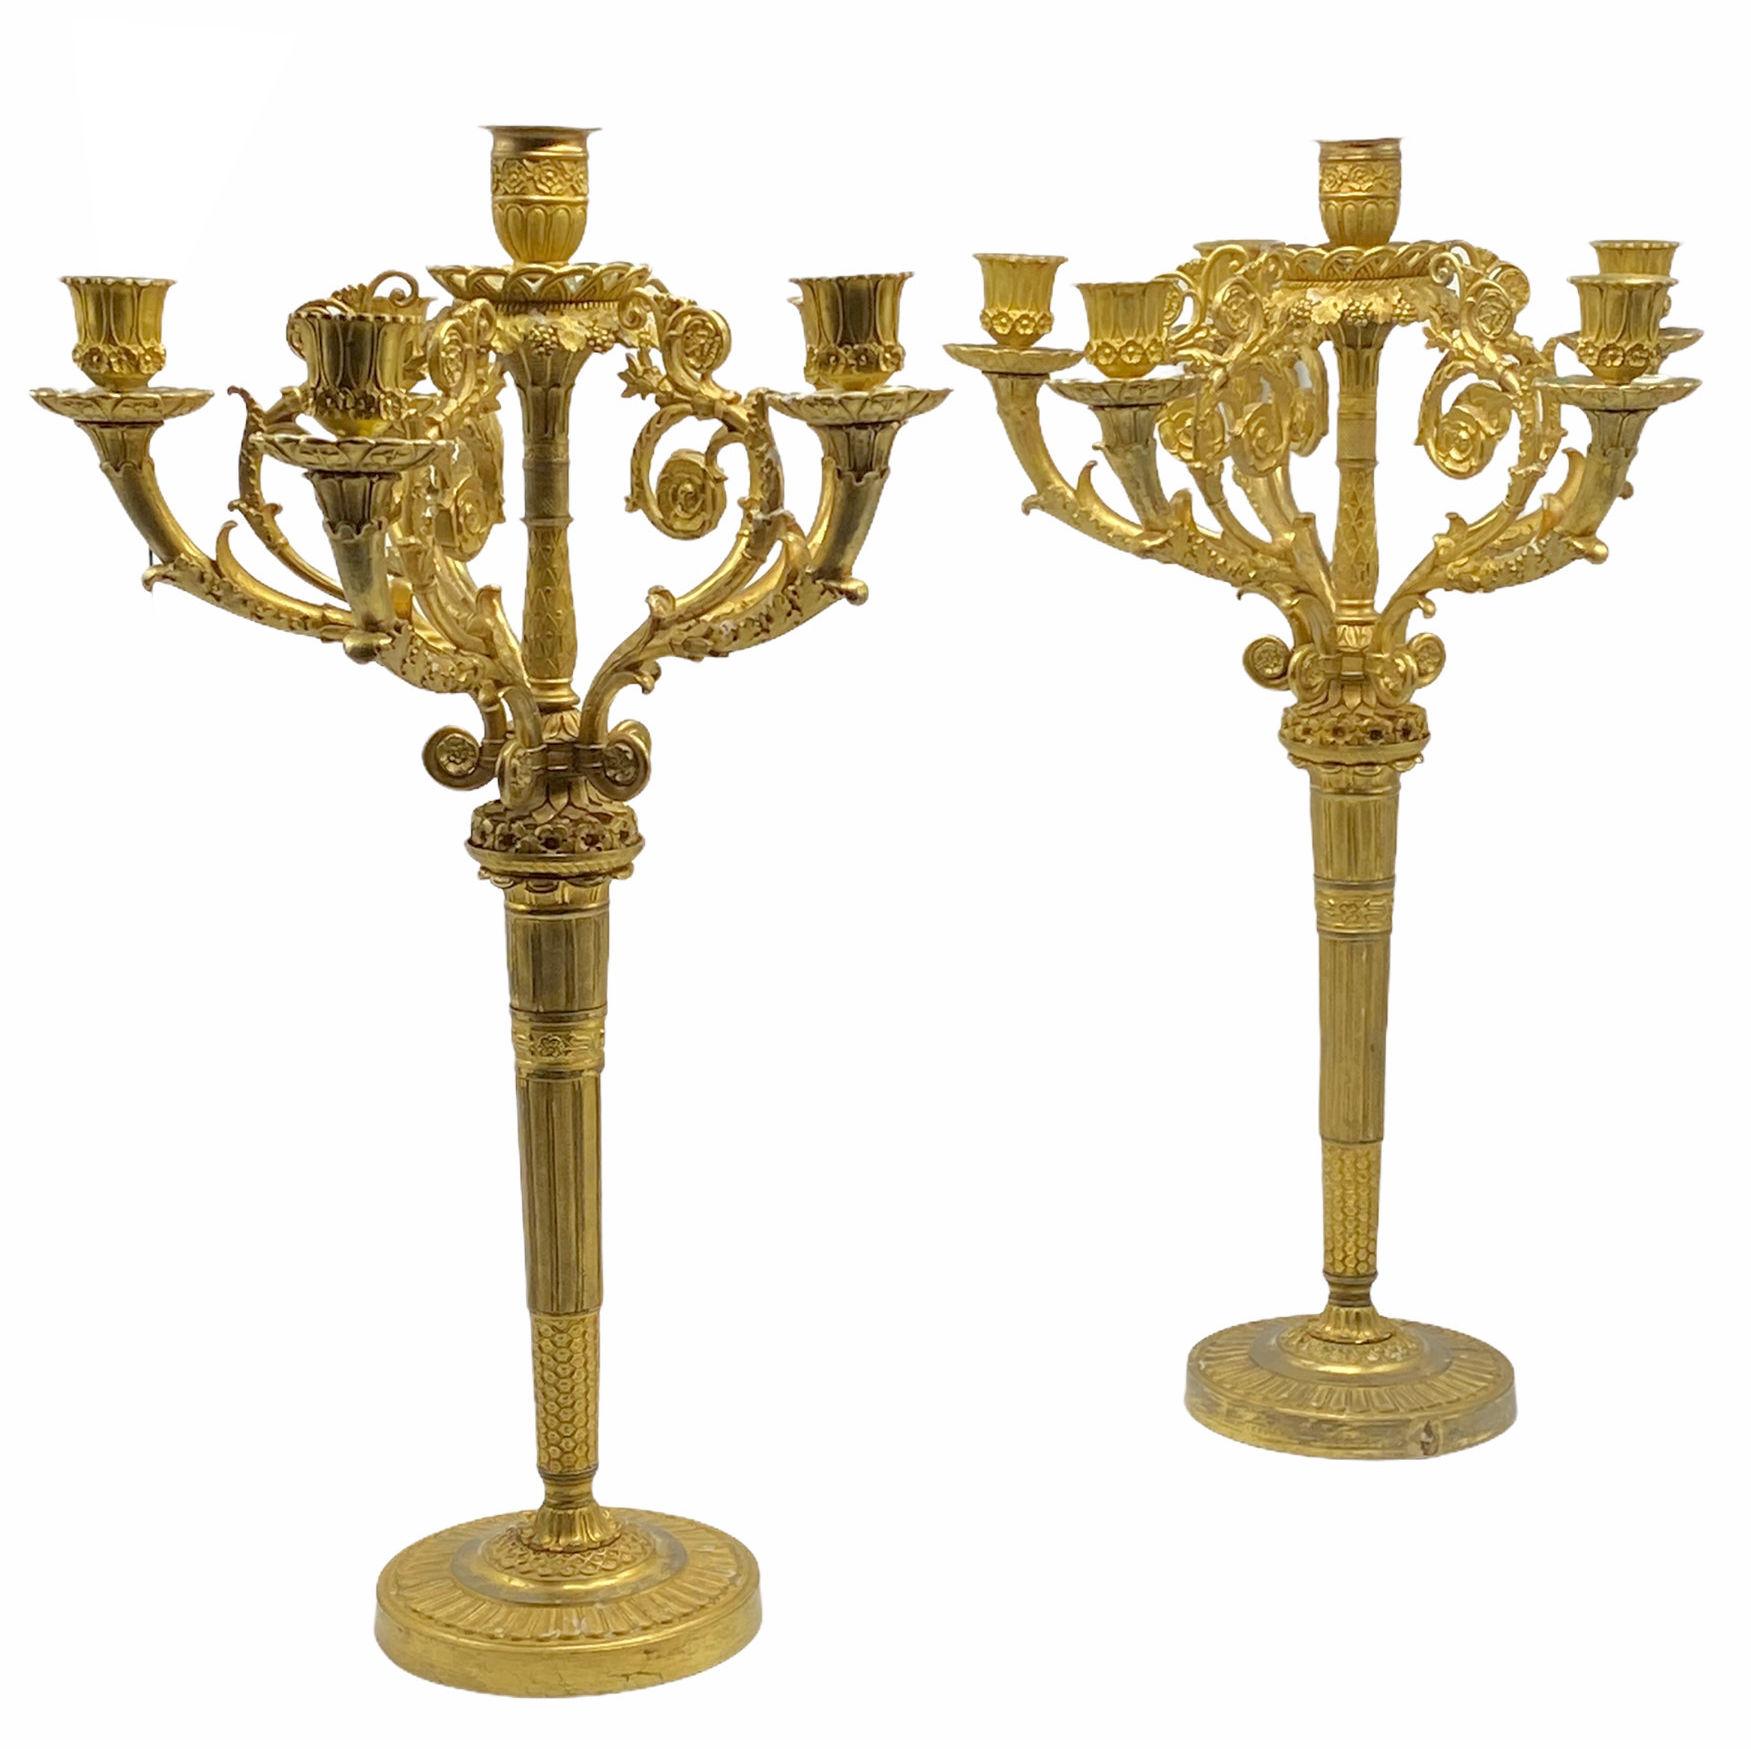 Pair of period Empire French early 19 century gilt bronze candelabras.